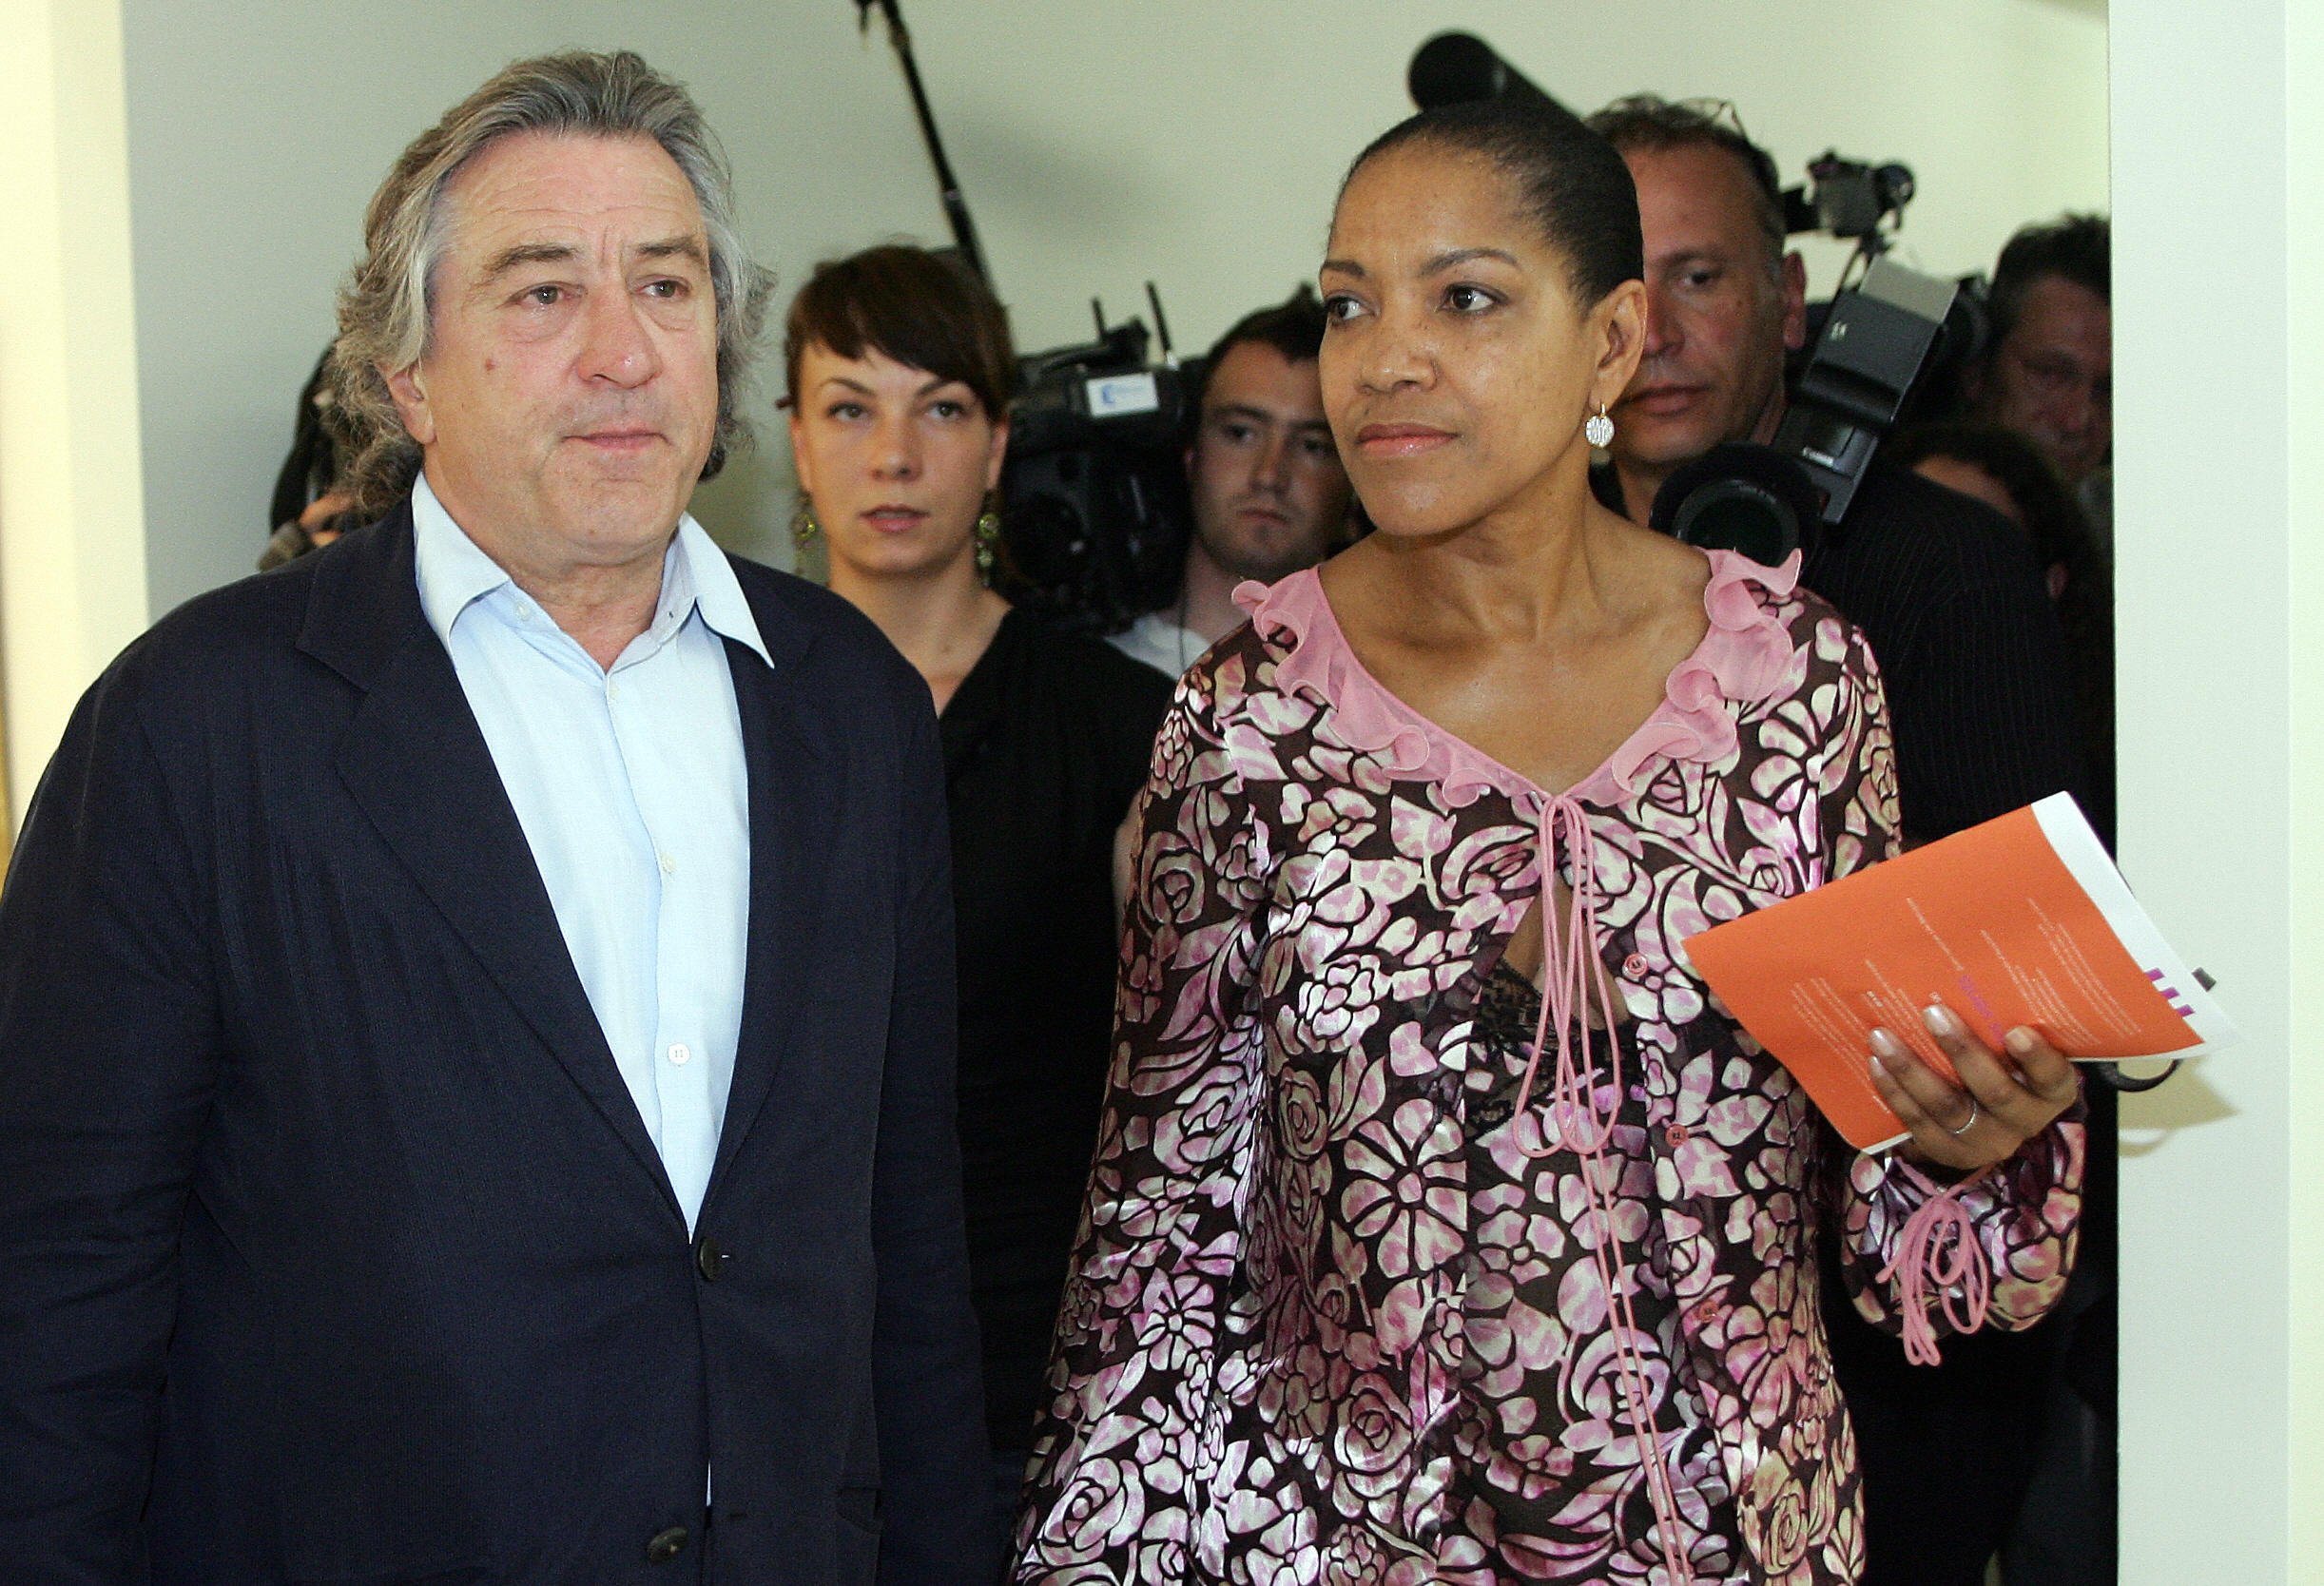 Robert De Niro arriving with Grace Hightower for a press conference on his late father, Robert De Niro Senior painting exhibition at the "La piscine" museum in Roubaix on 18 June 2005 in France | Source: Getty Images